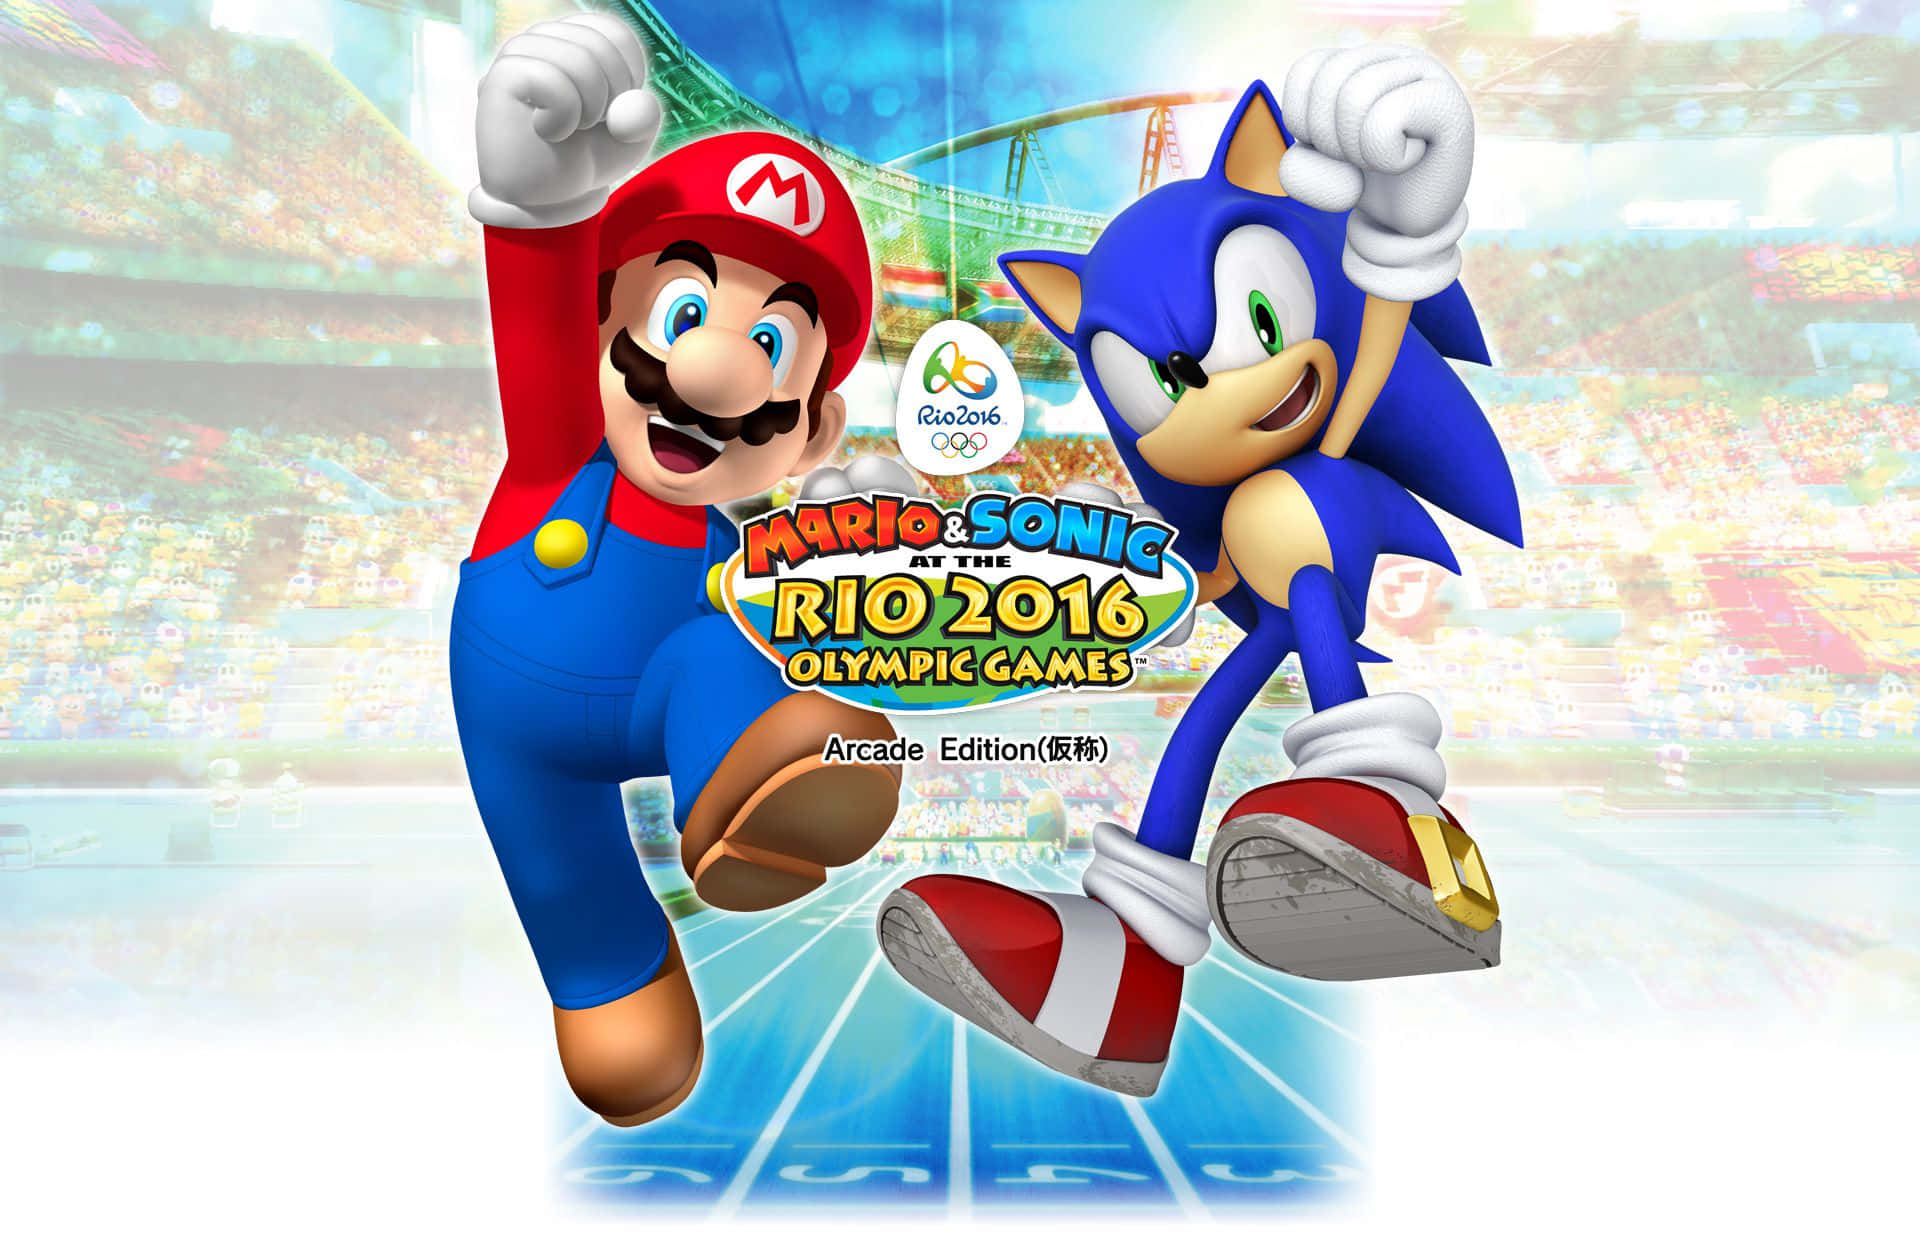 Mario And Sonic At The Olympic Games 1920 X 1233 Wallpaper Wallpaper